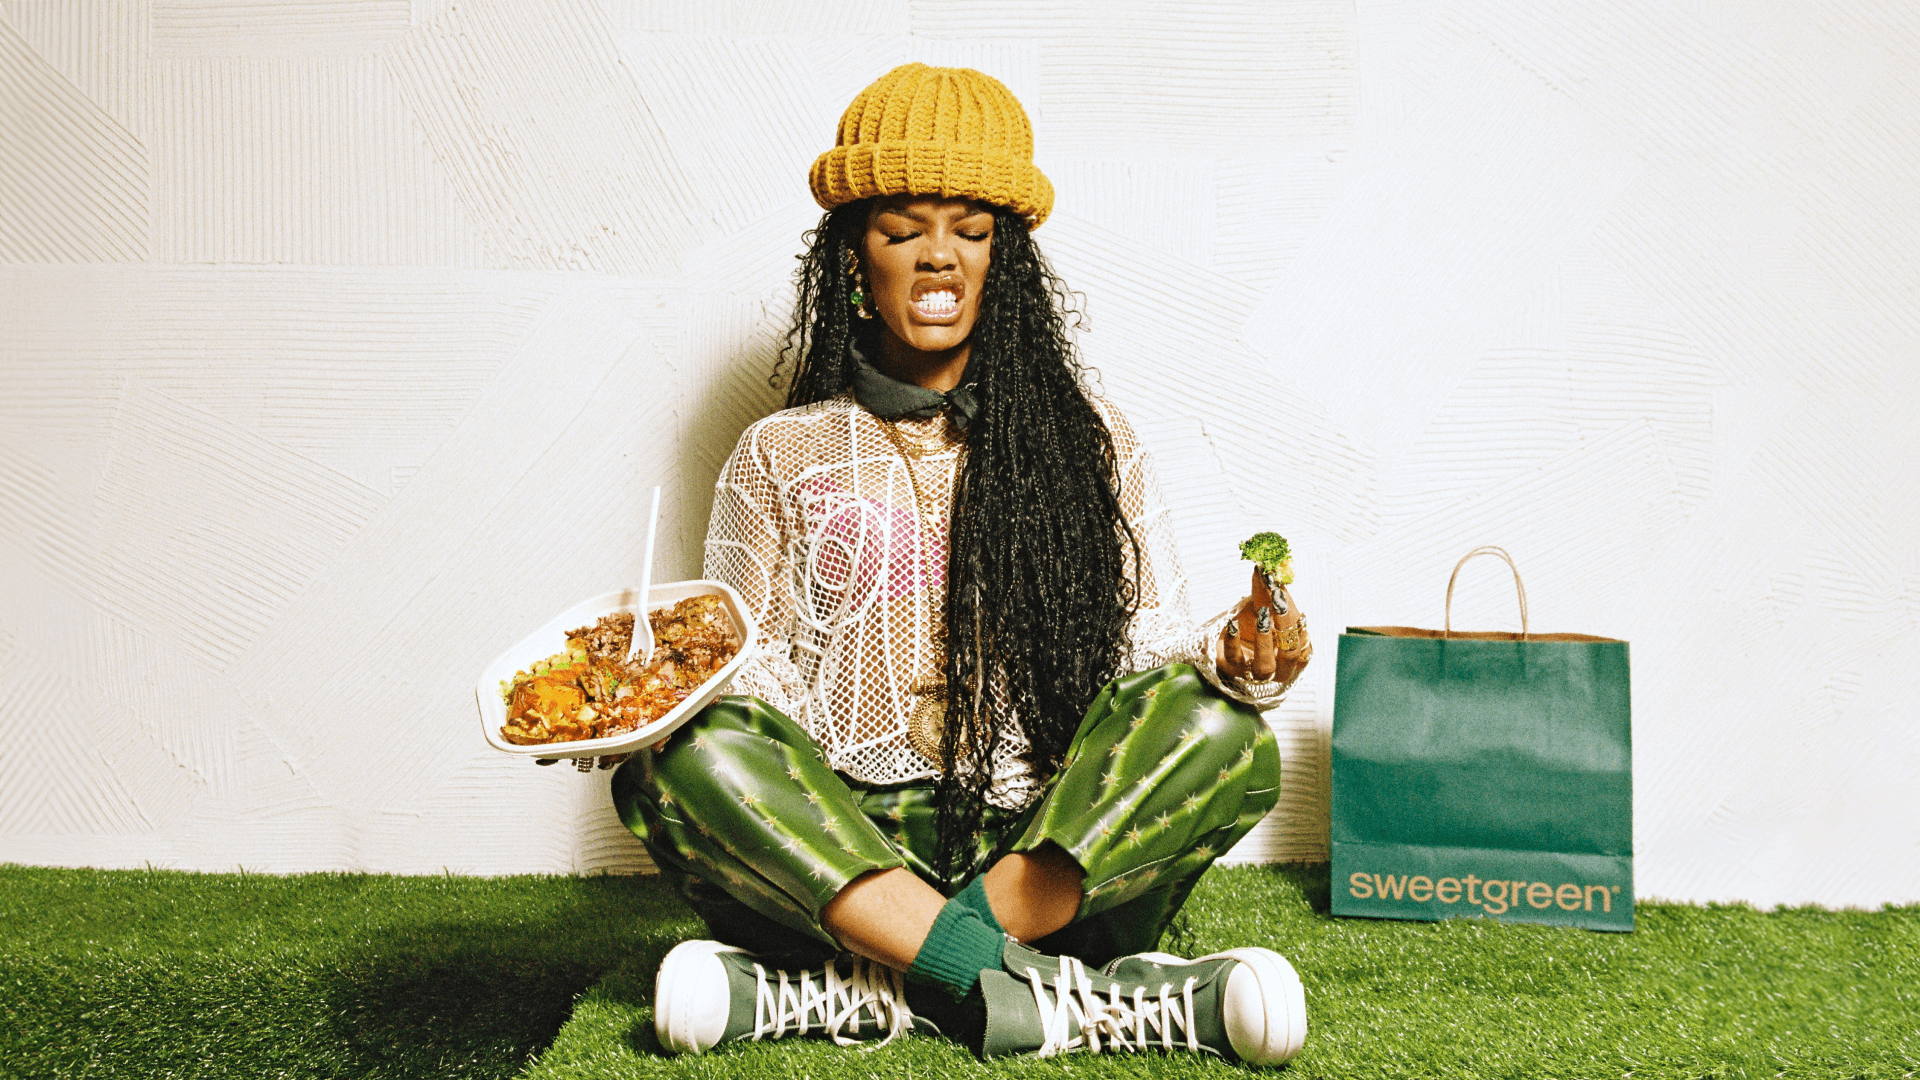 Teyana Taylor Secures Partnership With Sweetgreen To Help Support Single Mothers